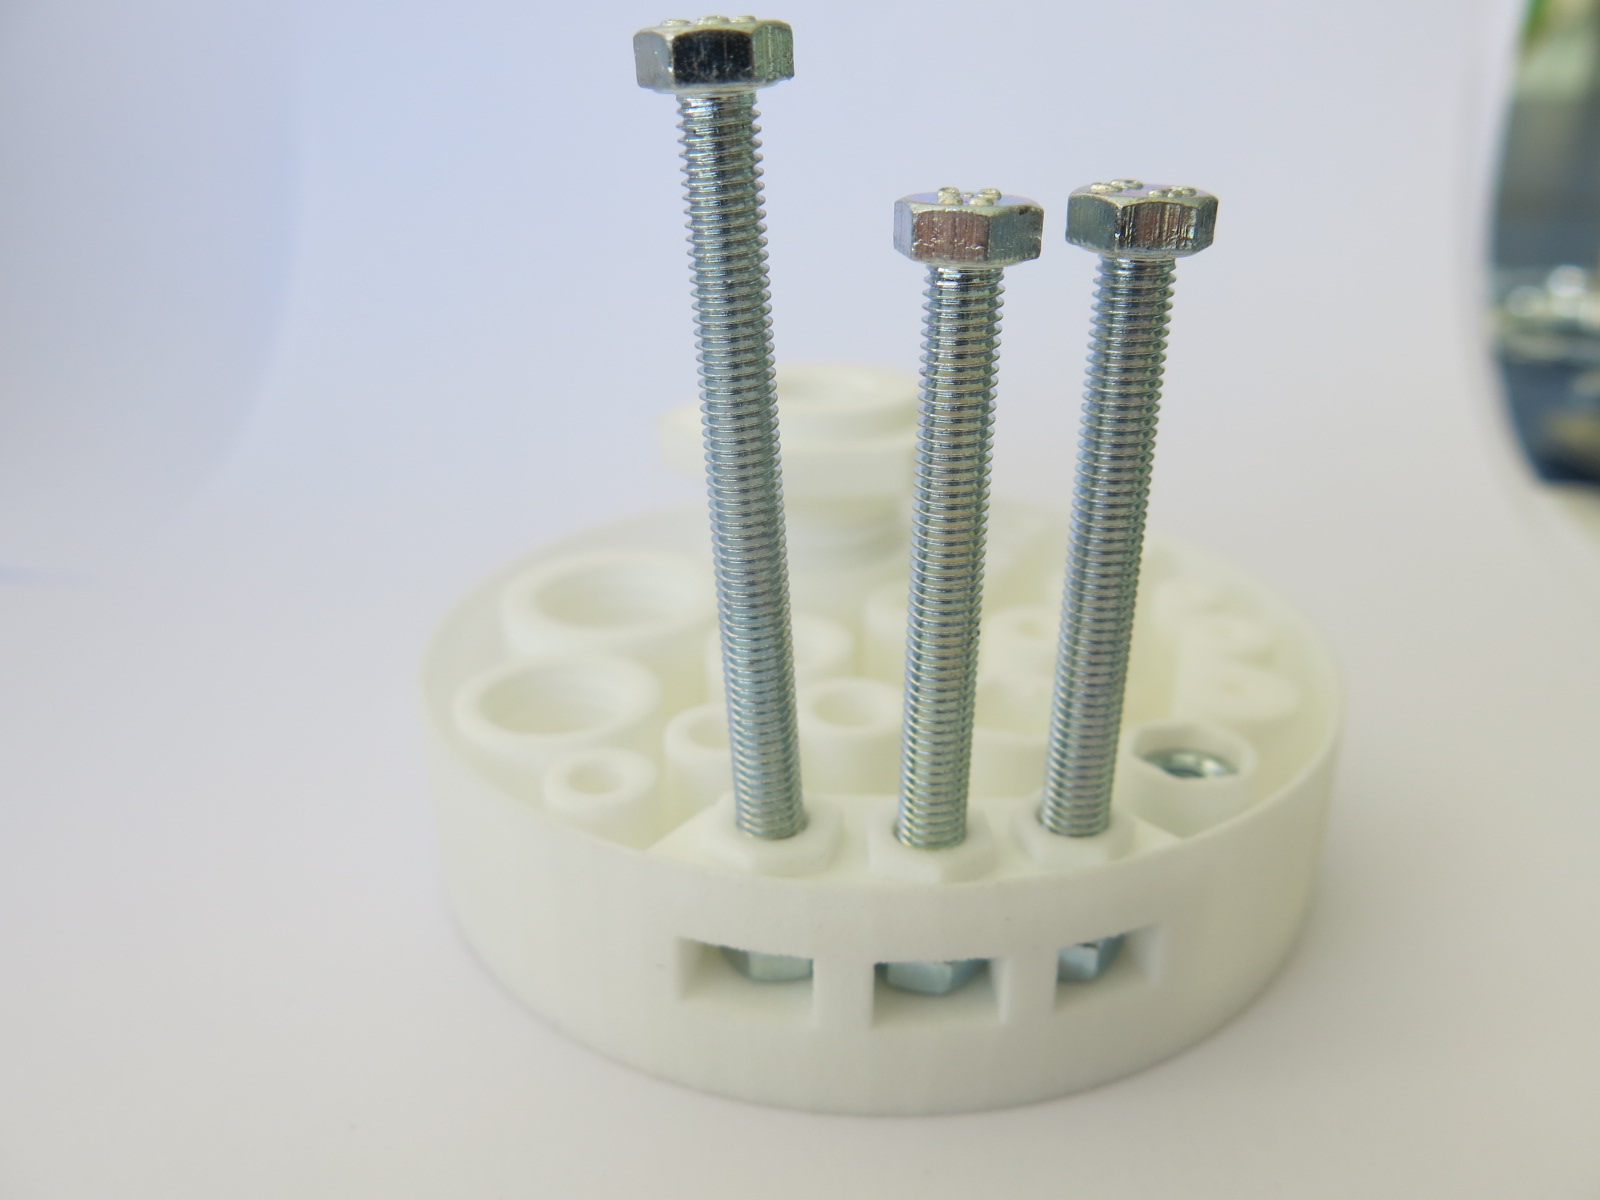 3D printed screws and threads